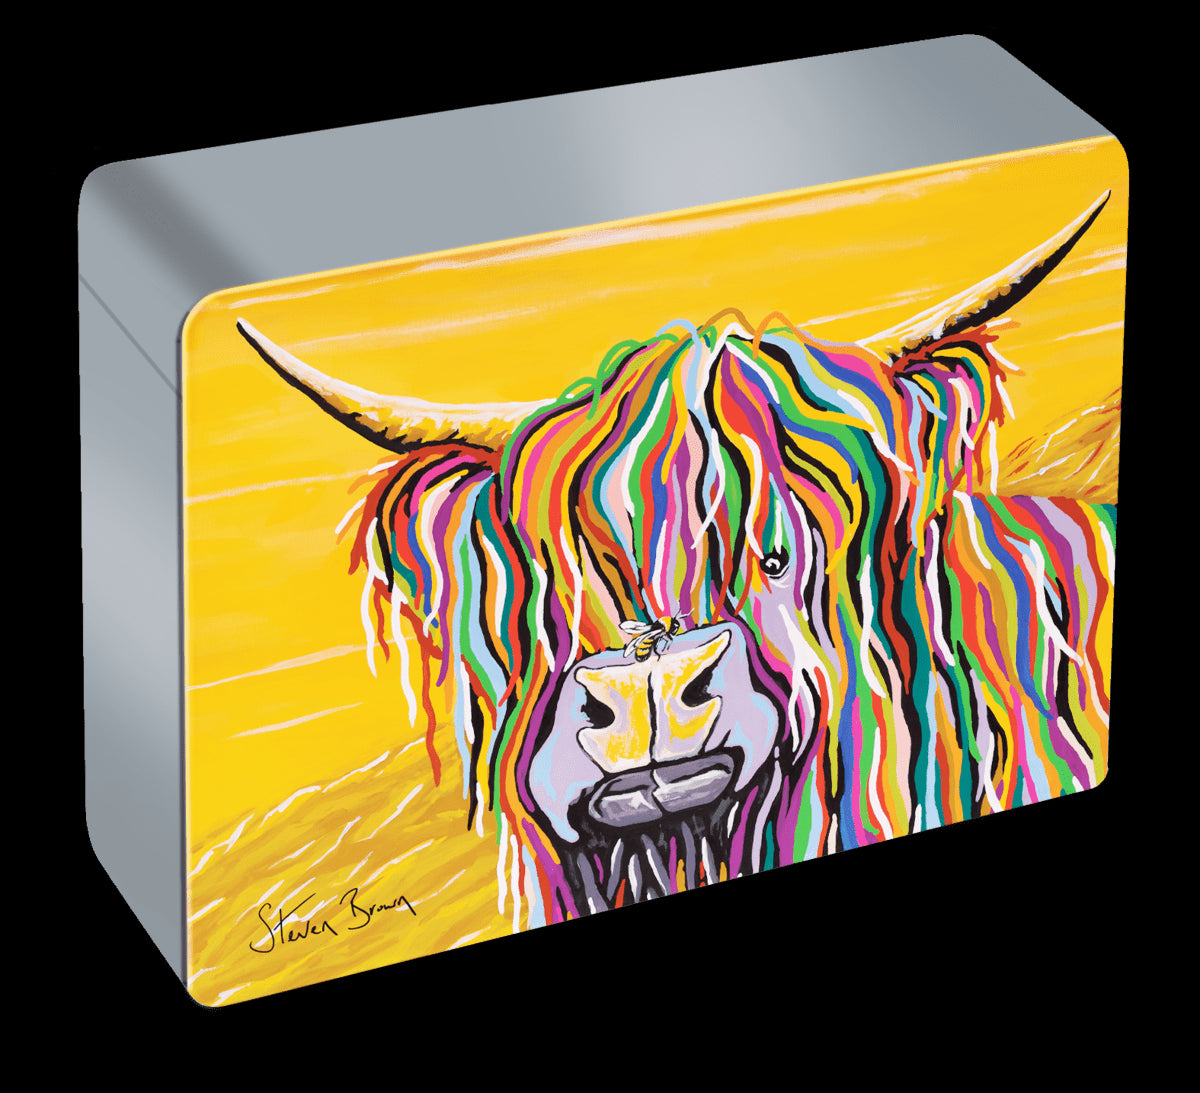 Gordon McCoo All Butter Assortment Tin 400g made by Dean's of Huntley.